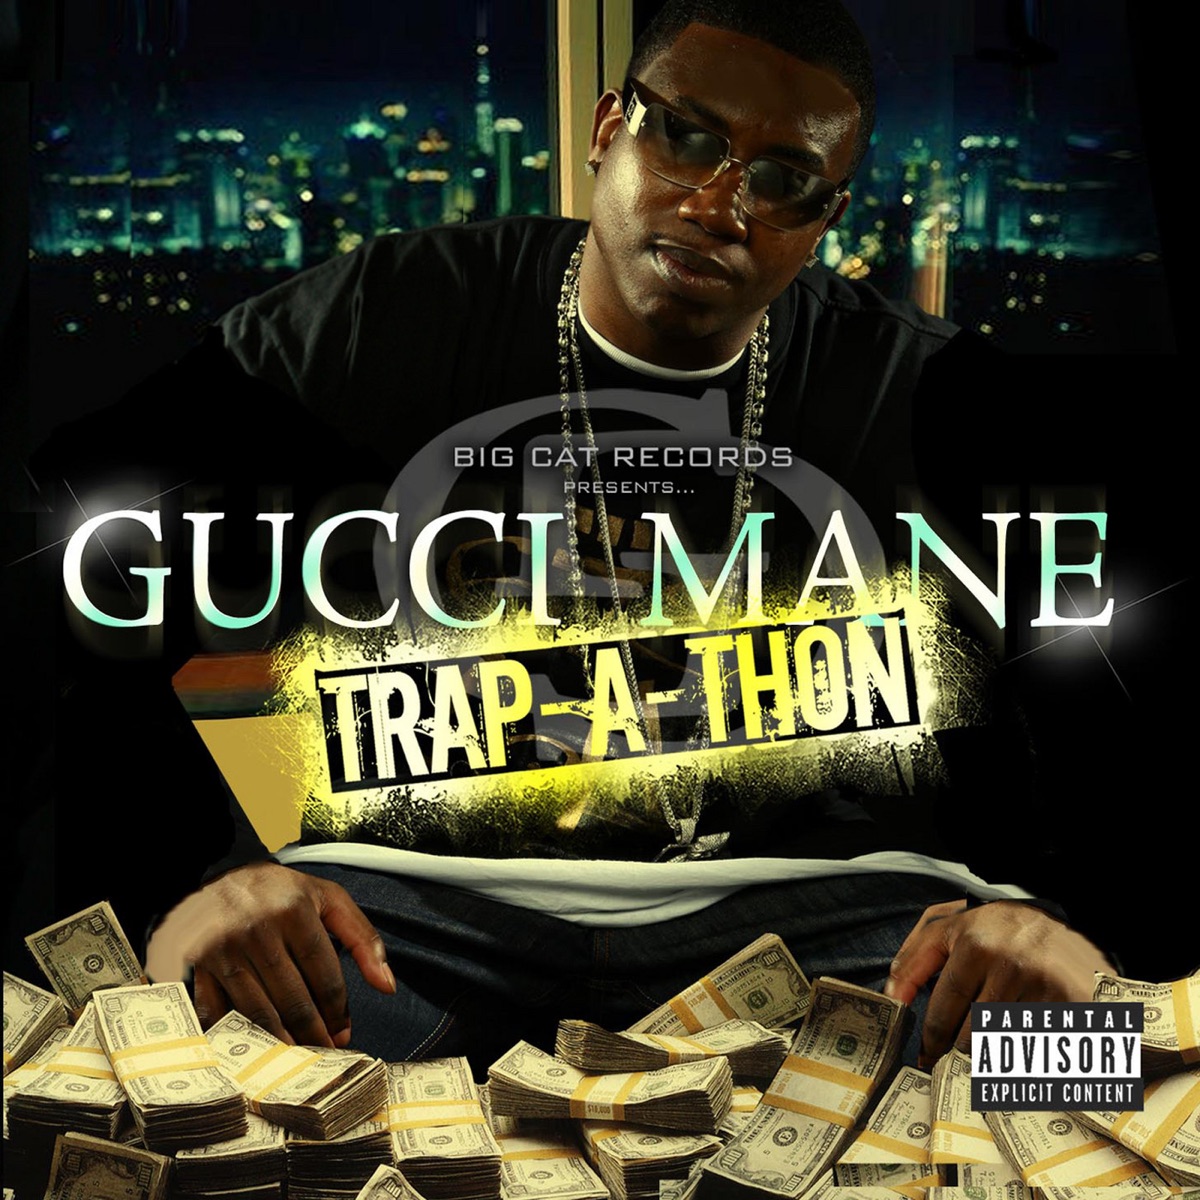 Trap-A-Thon by Gucci Mane on Apple Music